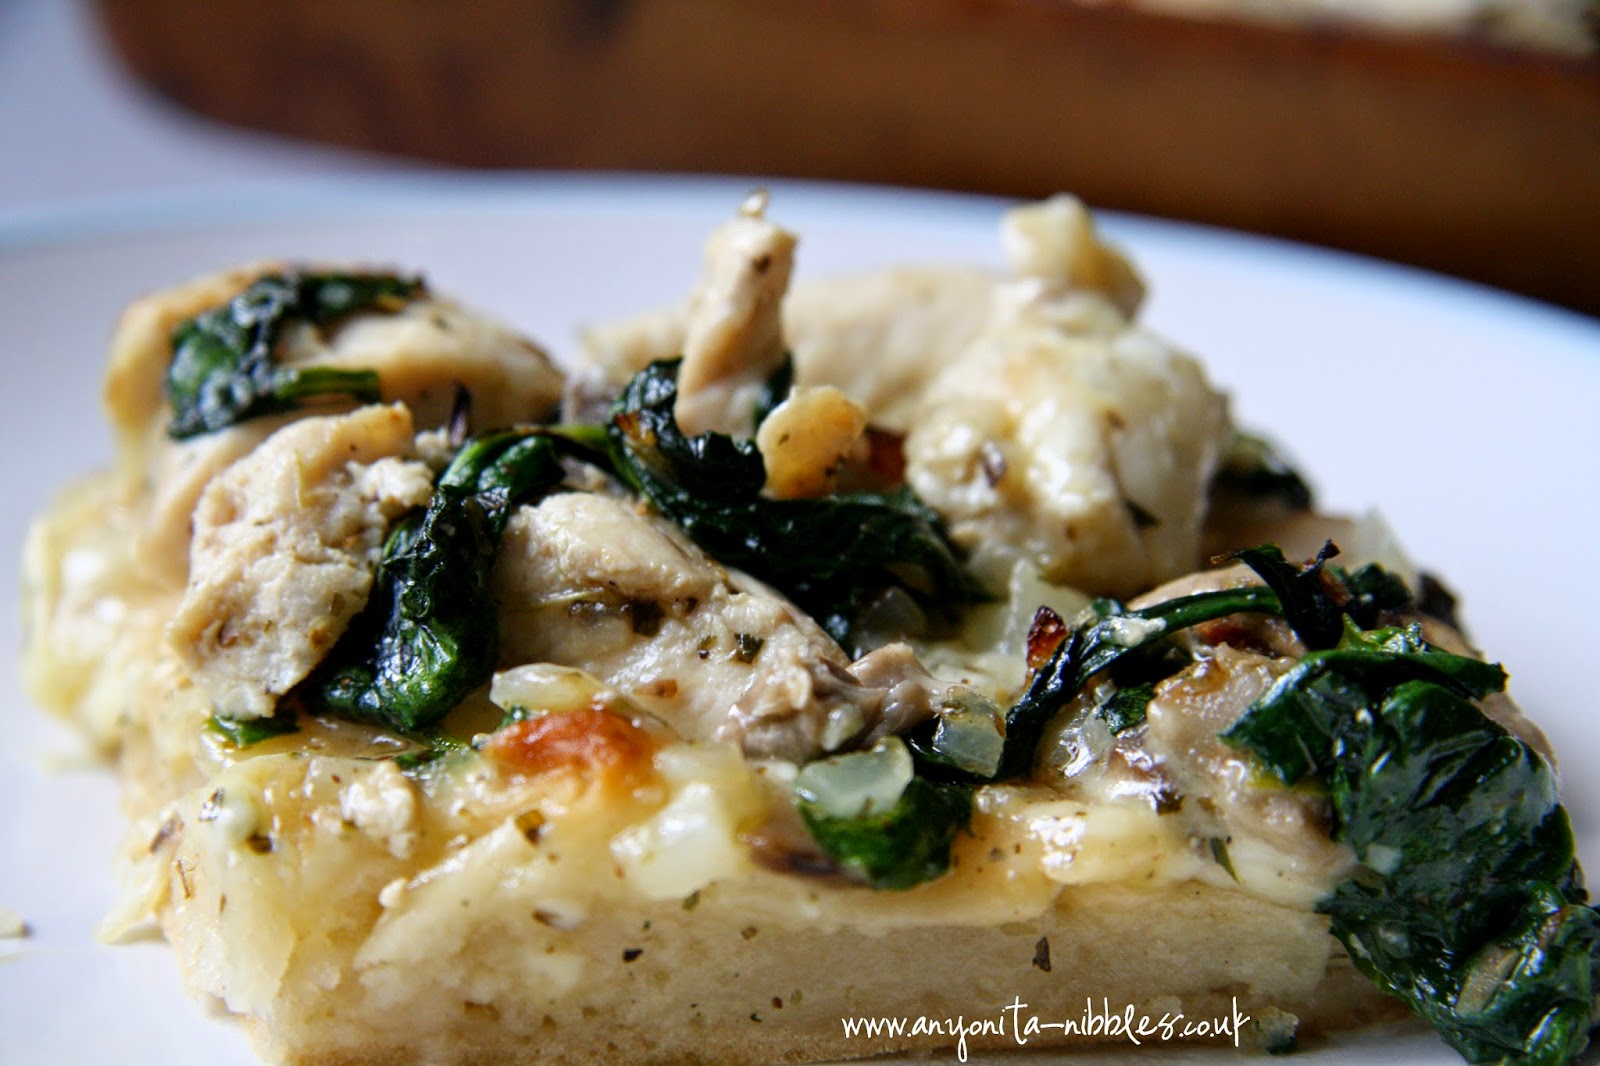 white #glutenfreepizza with mushrooms, onions, spinach and chicken from www.anyonita-nibbles.co.uk